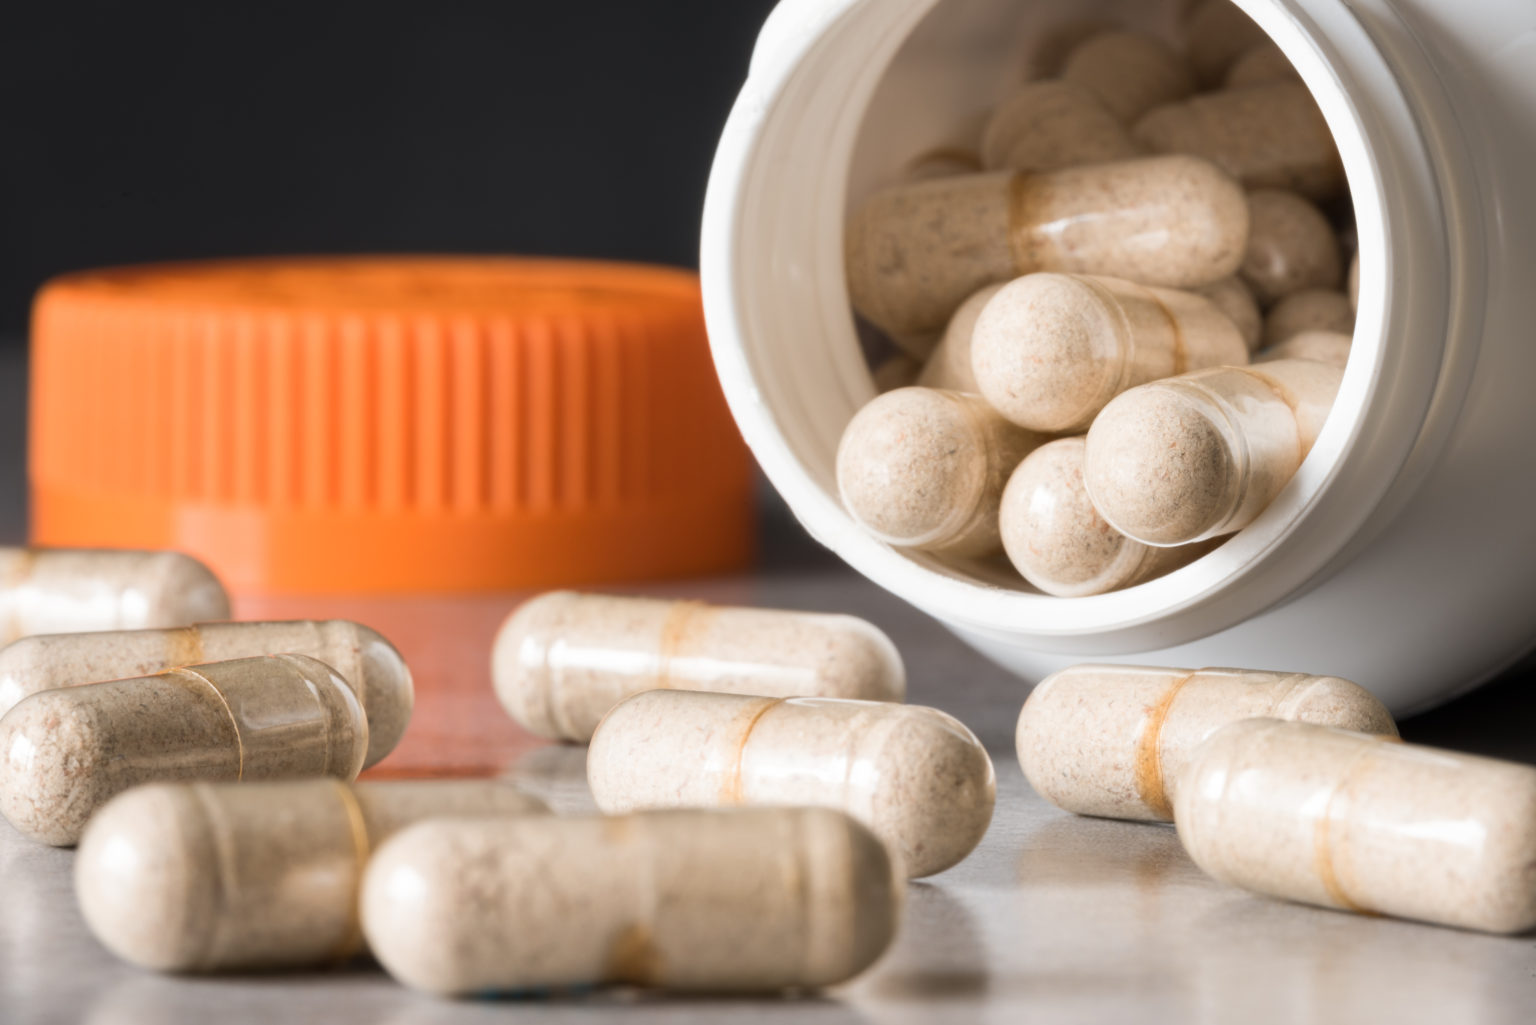 Which Capsule Supplement is Right for Me?